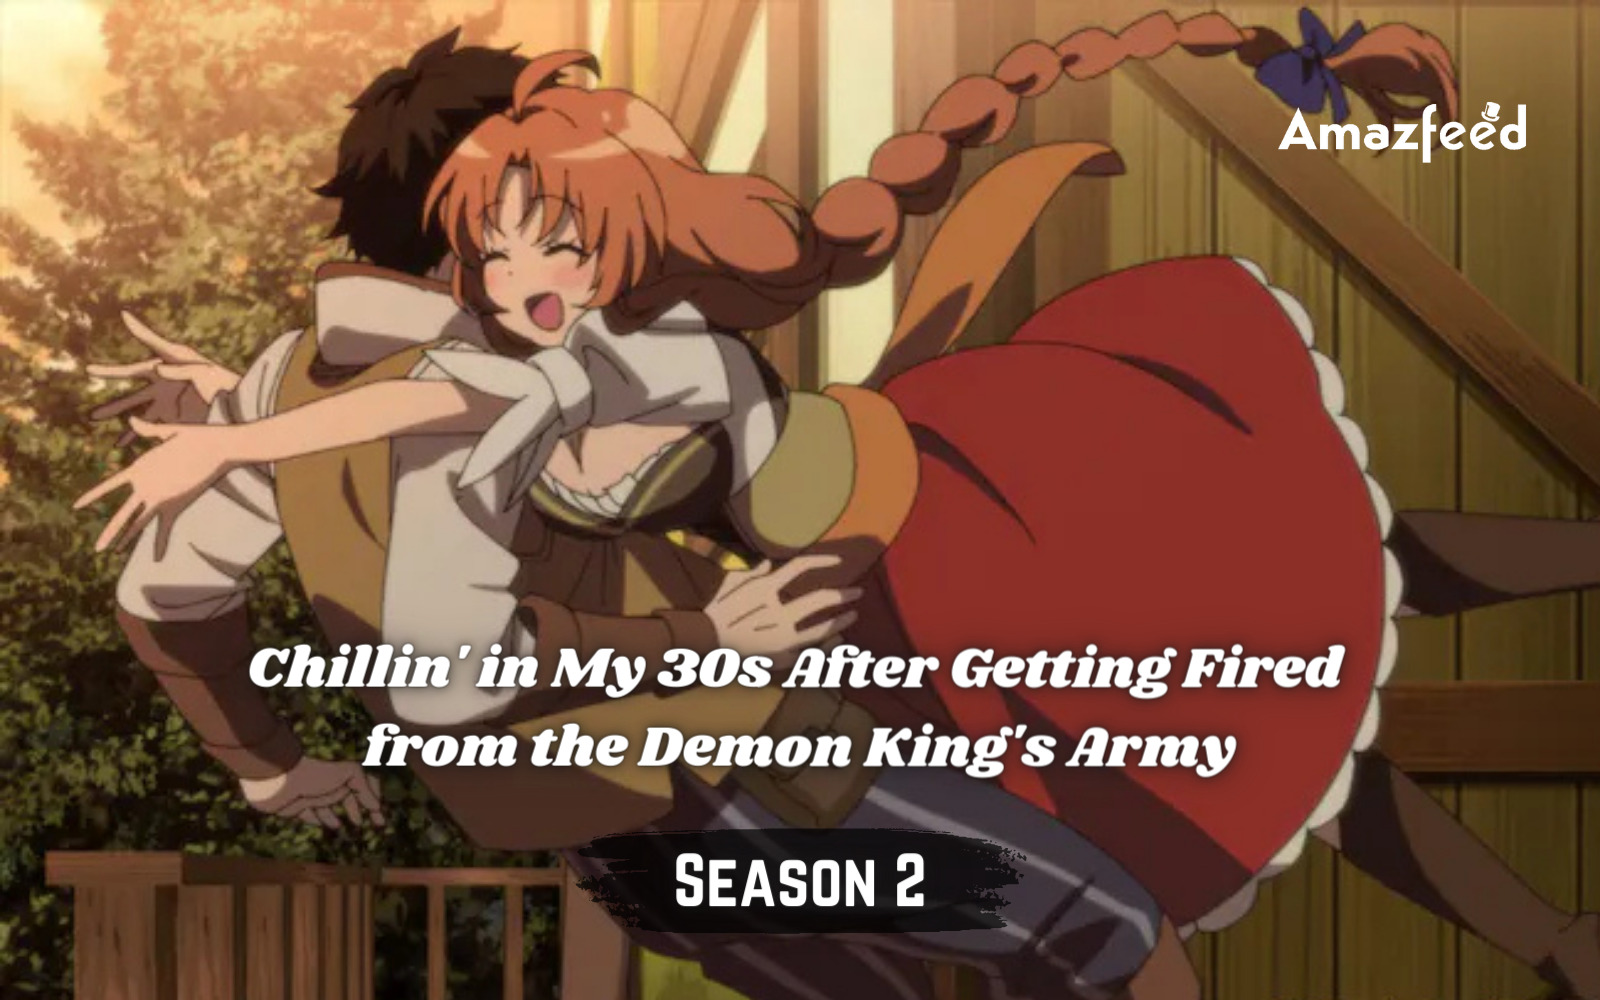 Watch Chillin' in My 30s after Getting Fired from the Demon King's Army  season 1 episode 9 streaming online